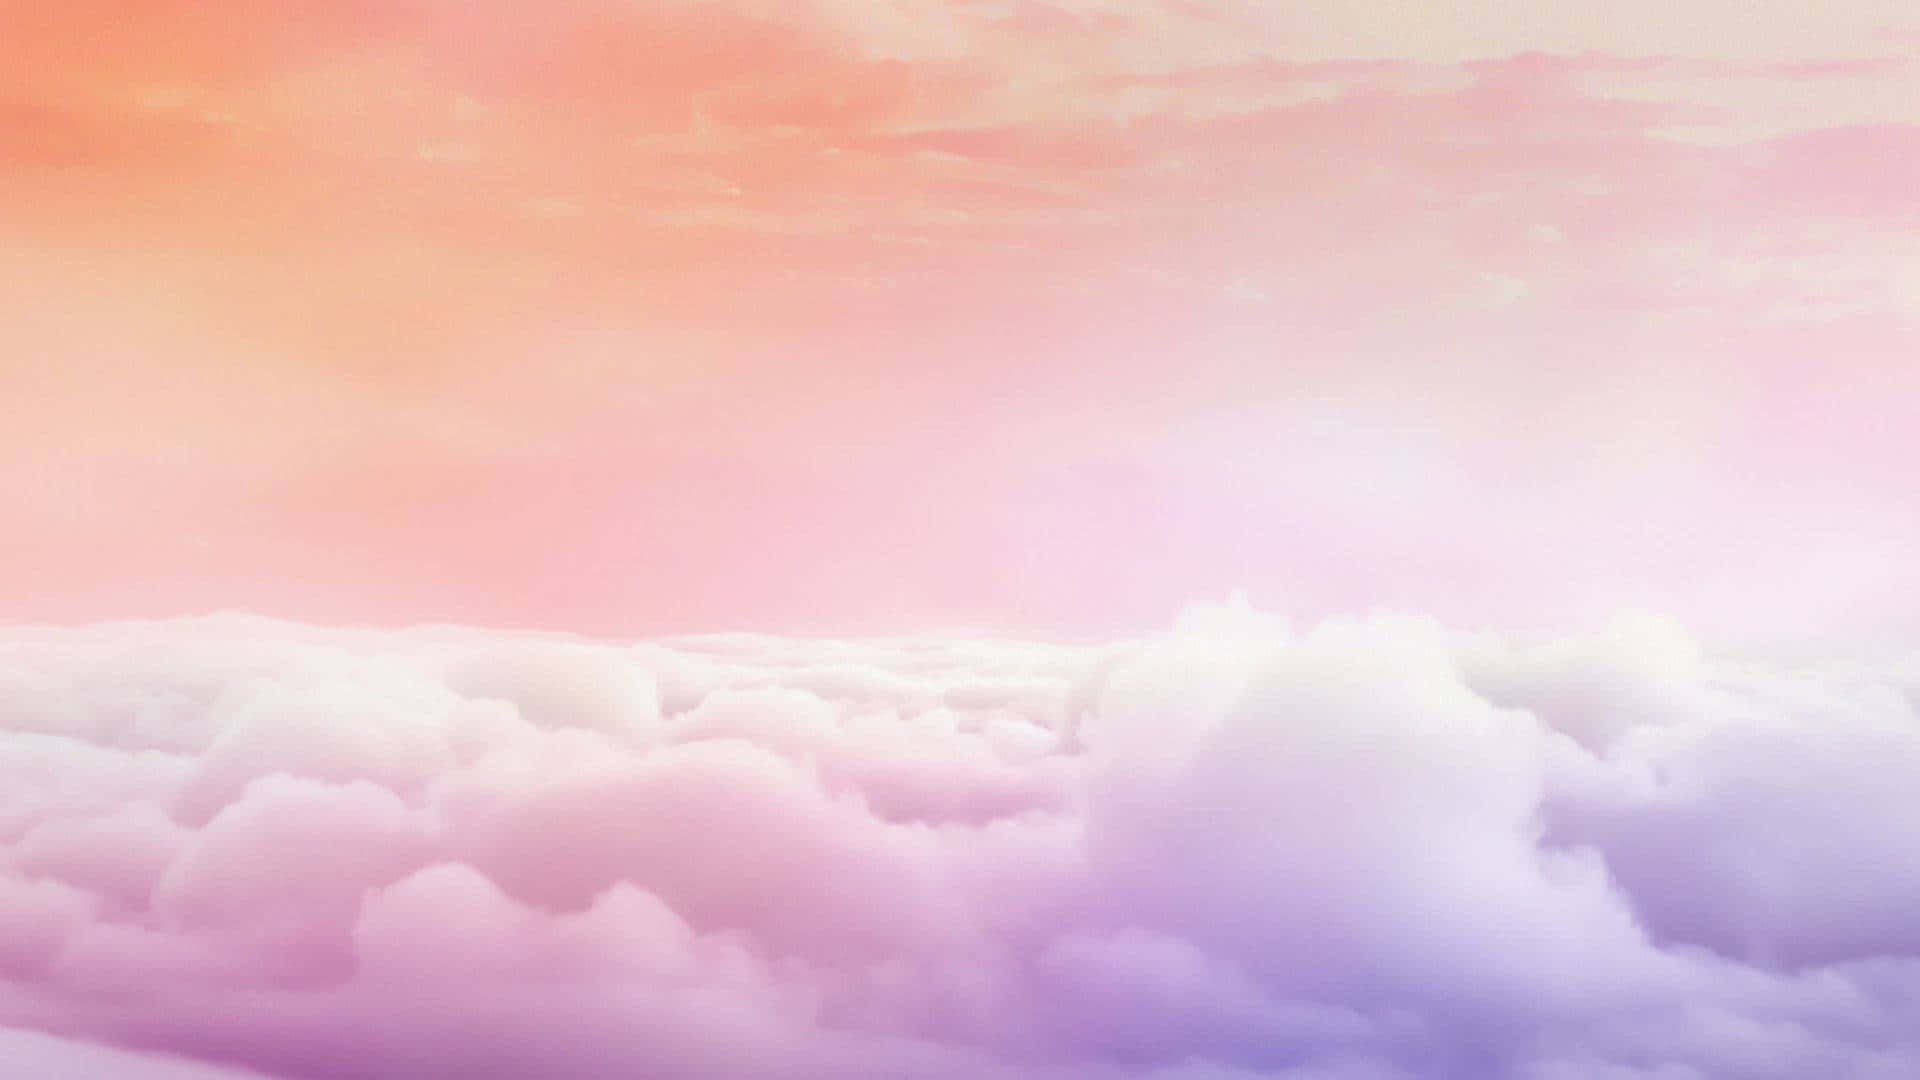 Orange Sky With Pink And Purple Clouds Background Wallpaper